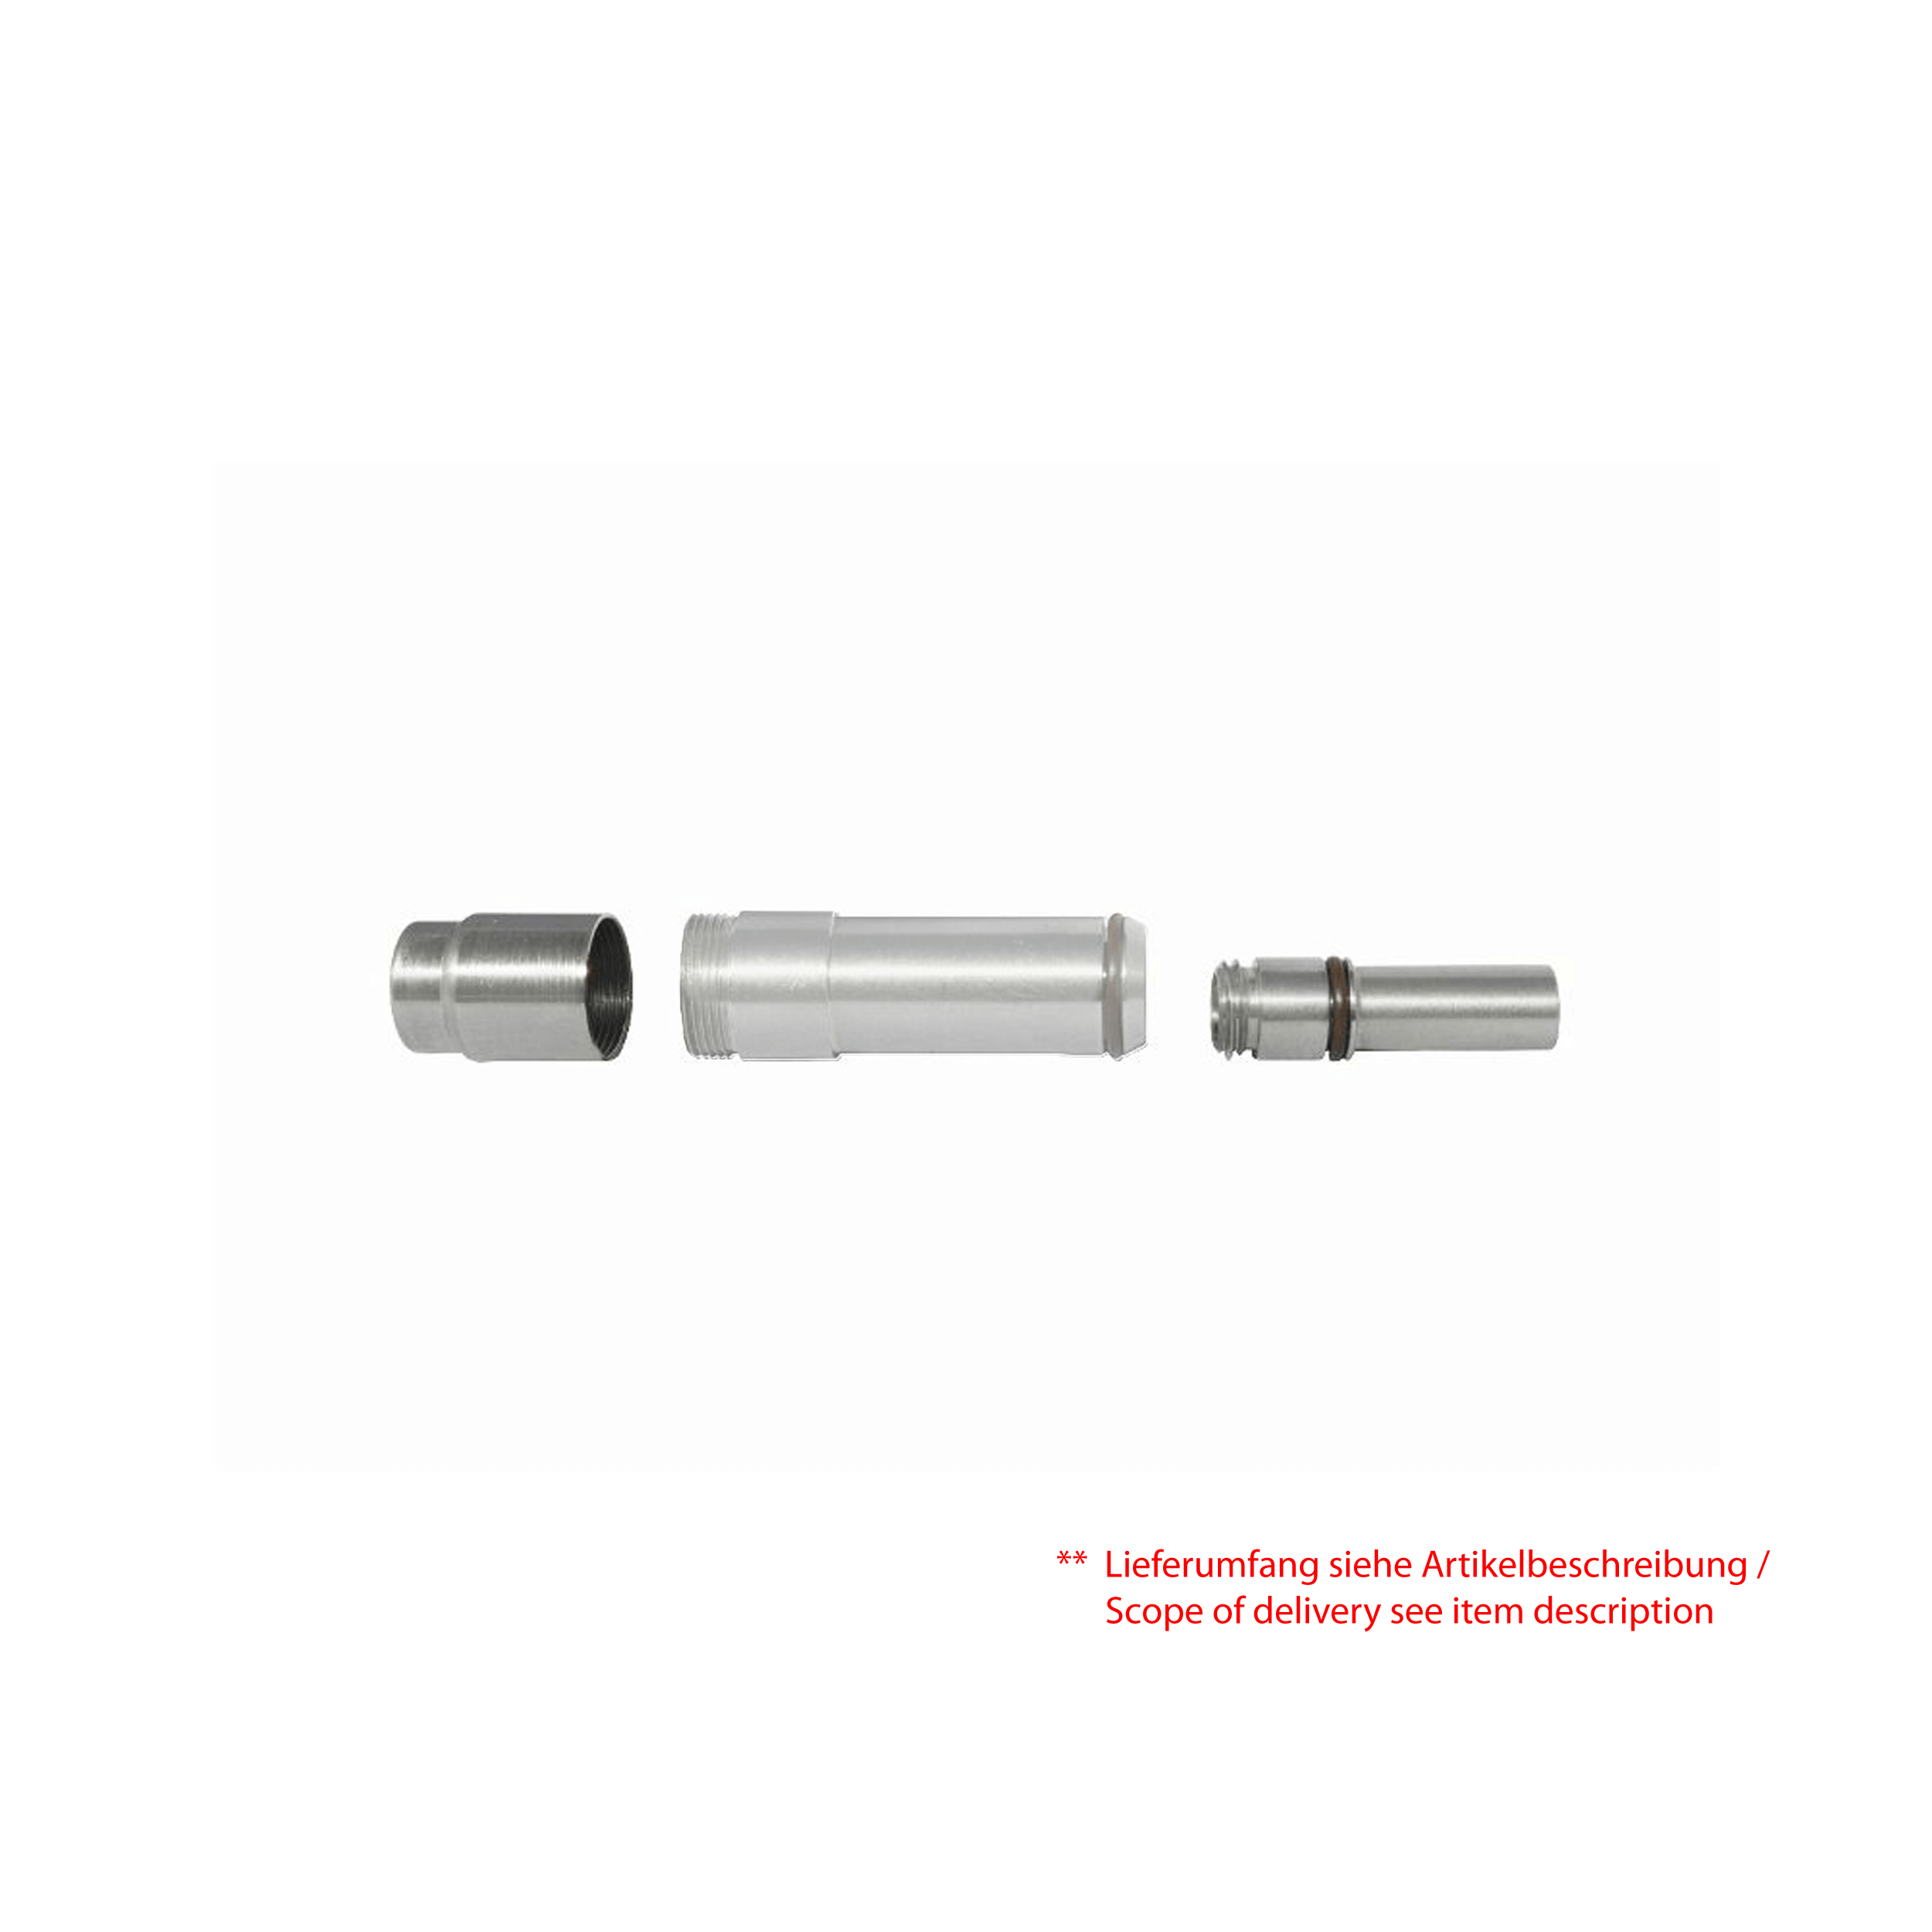 .223 Adapter kit for AR 15